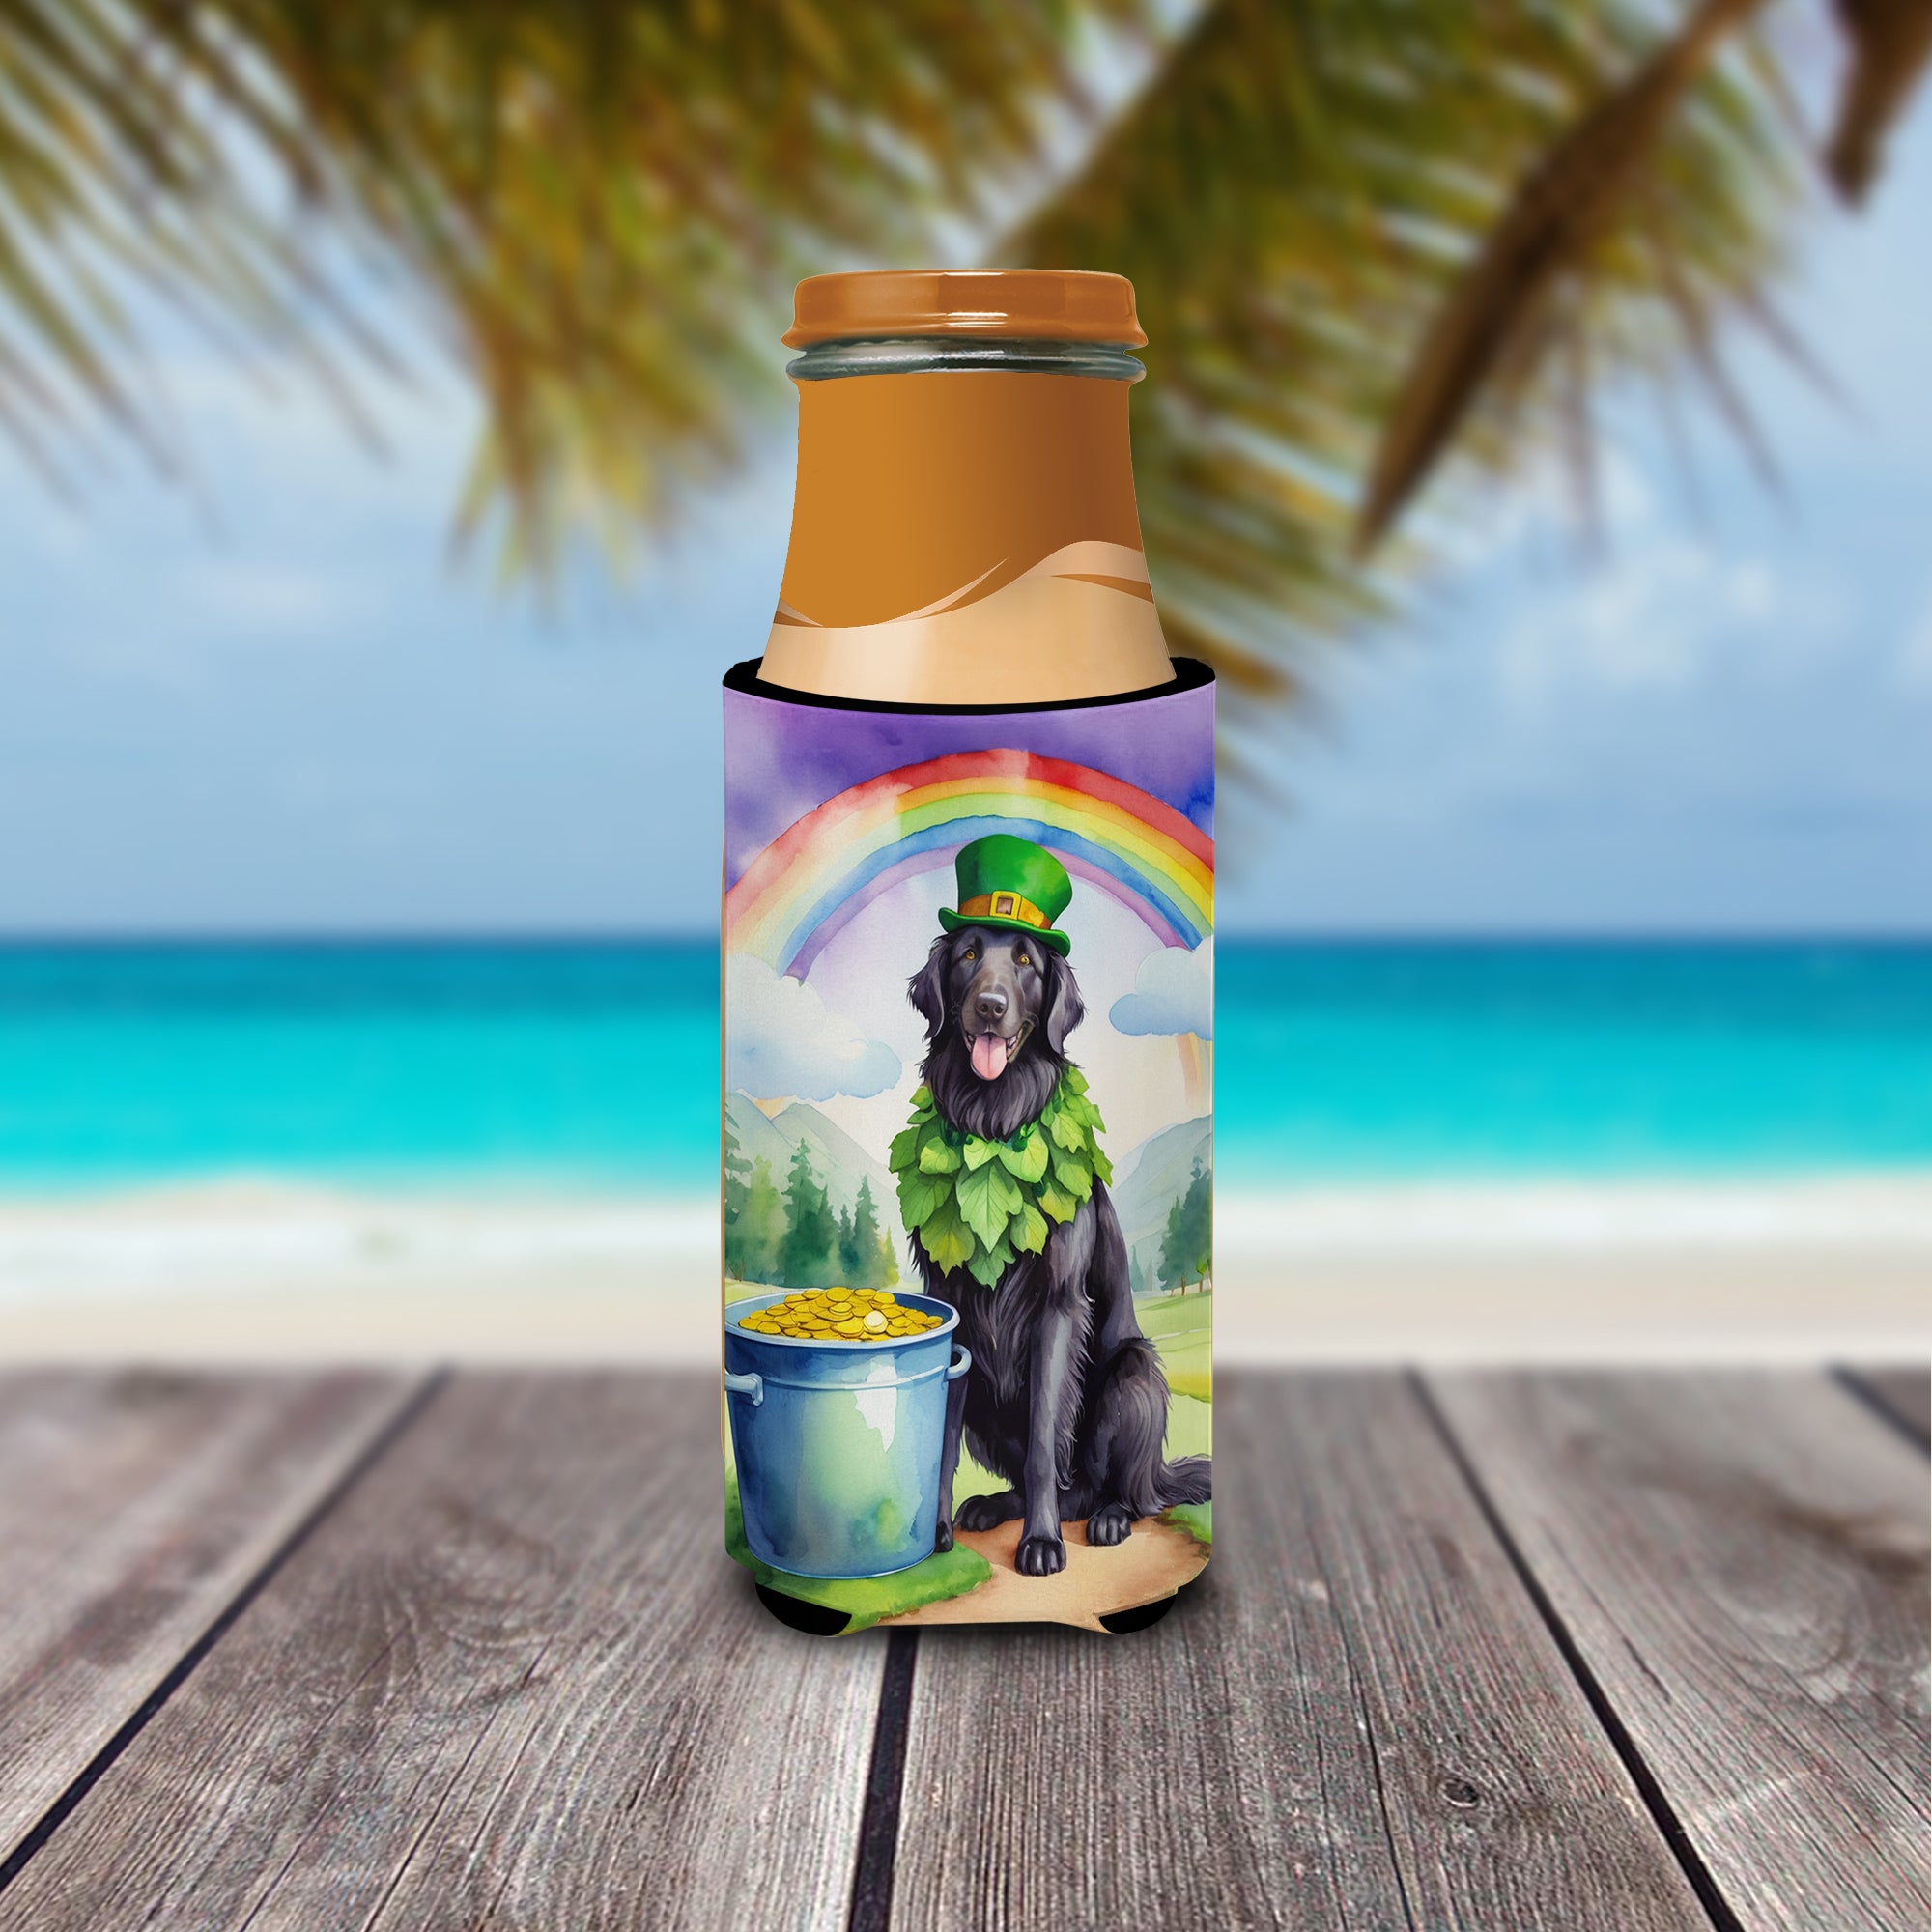 Flat-Coated Retriever St Patrick's Day Hugger for Ultra Slim Cans